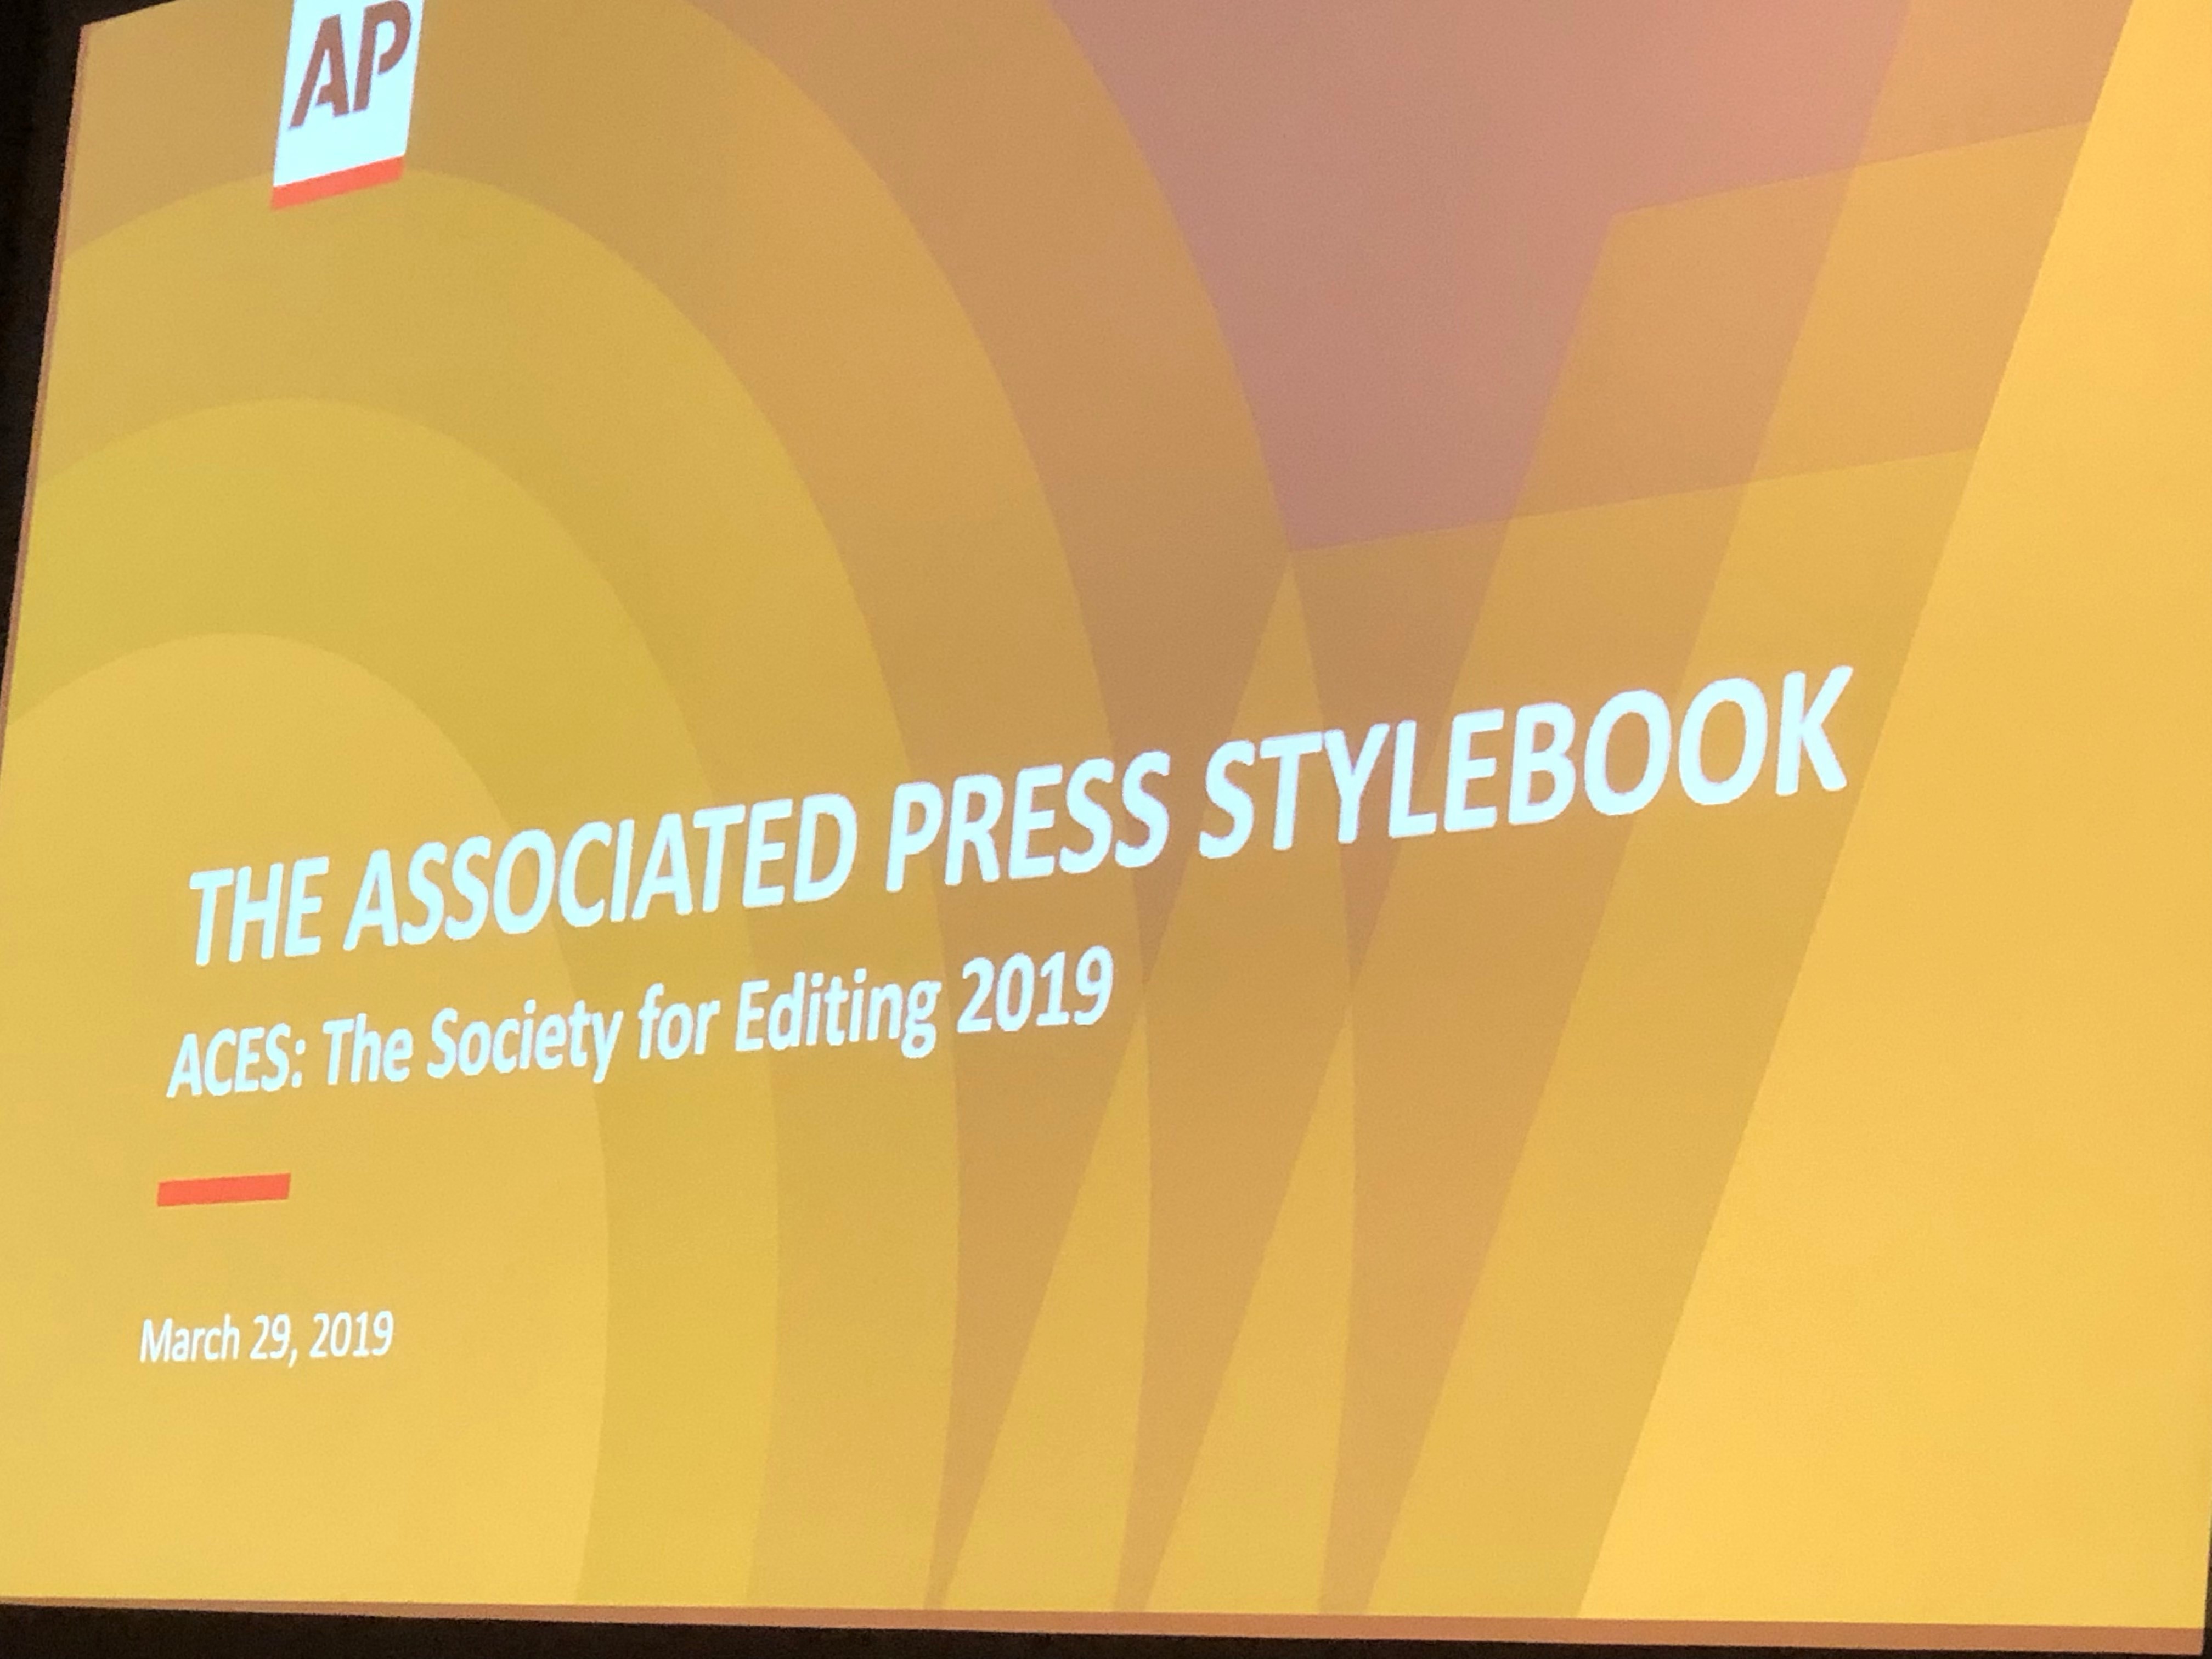 AP Stylebook adds new umbrella entry for race-related coverage, issues new hyphen guidance and other changes